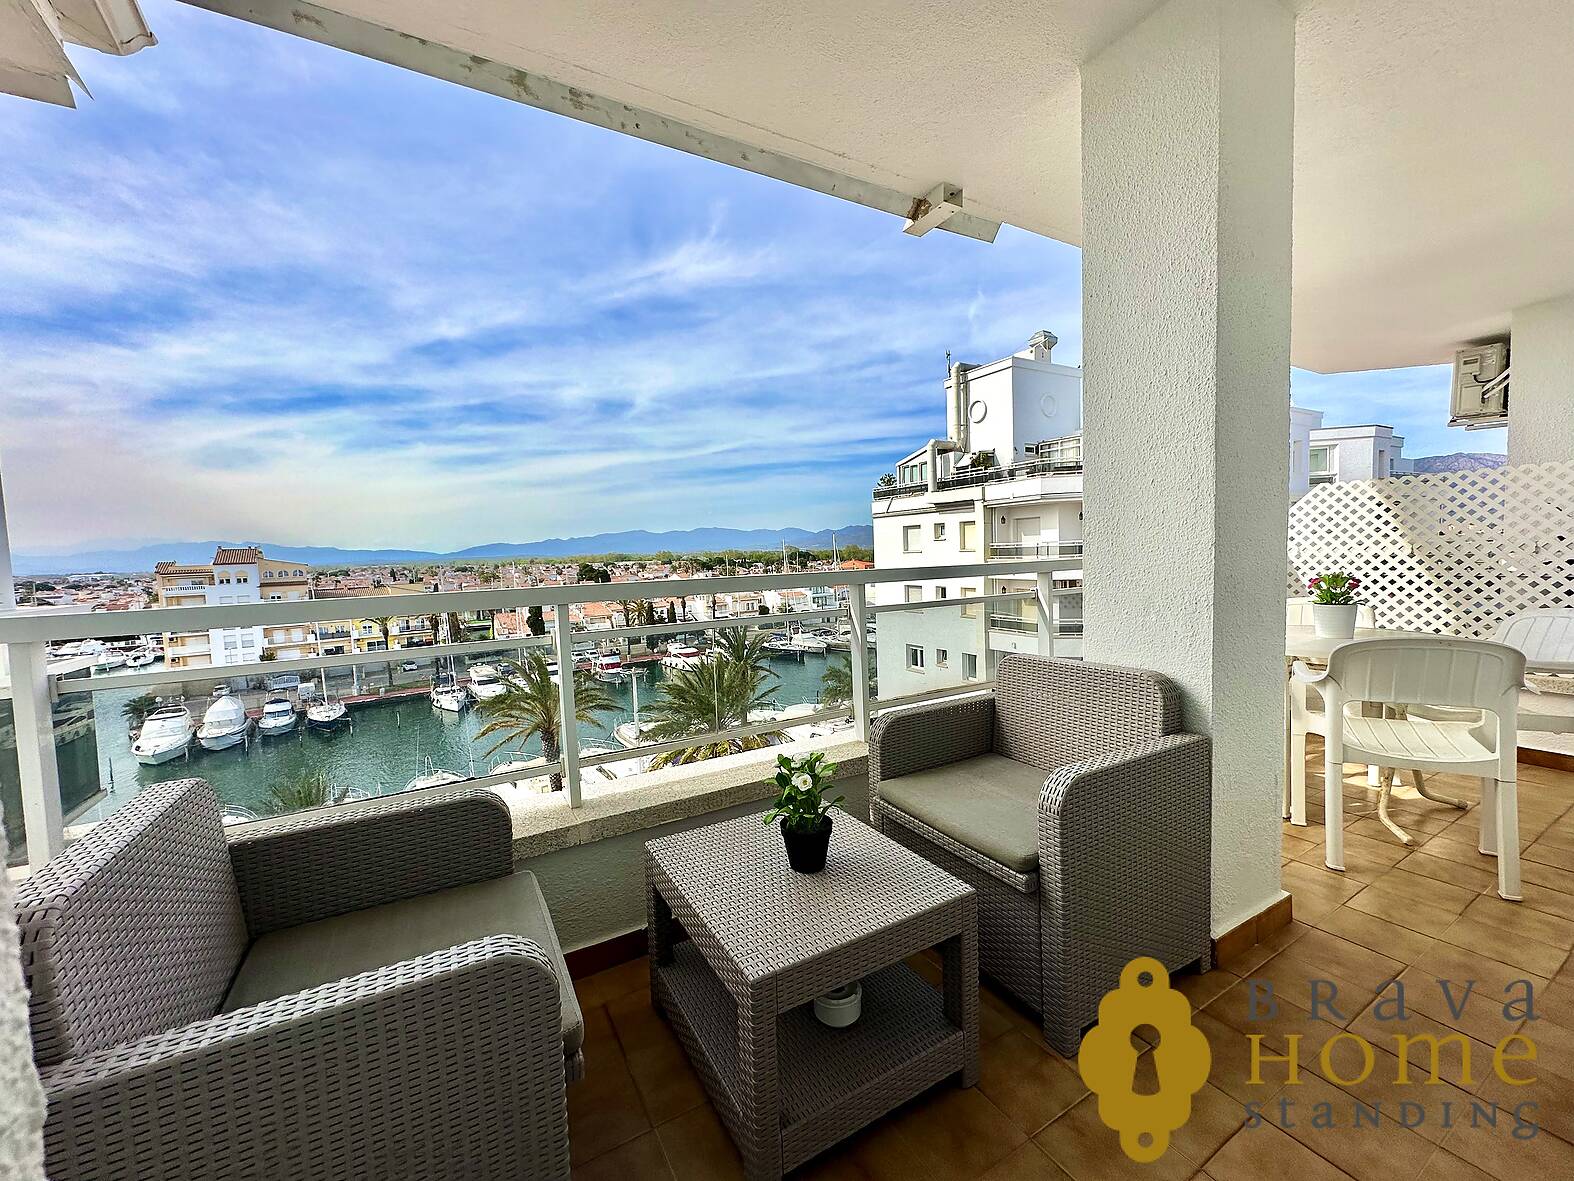 Beautiful apartment overlooking the port of Empuriabrava, for sale